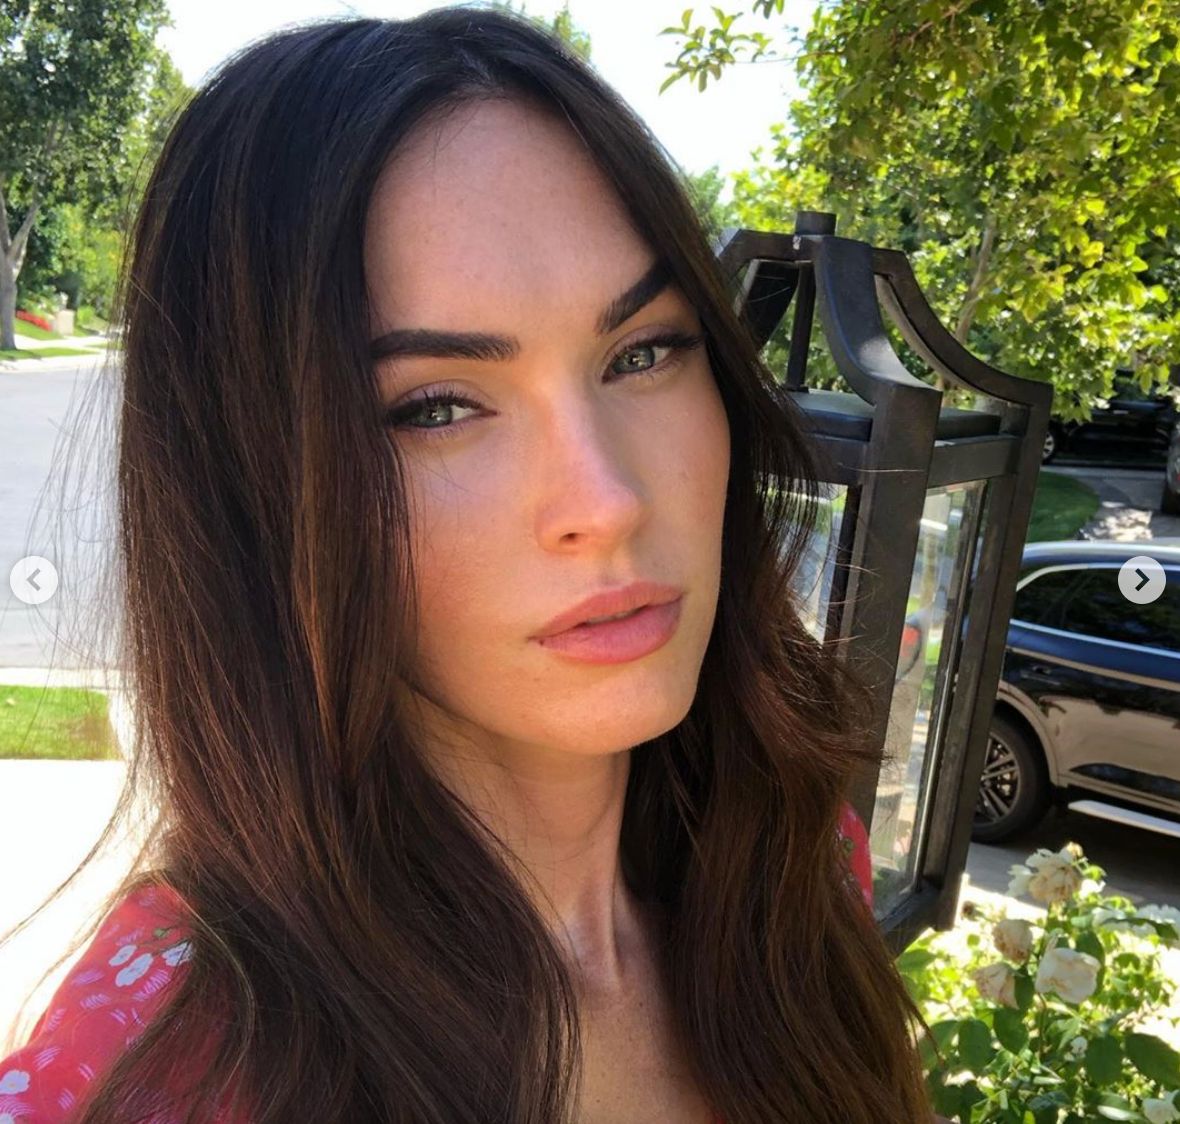 Megan Fox Is Back On Instagram With Series Of Selfies And Fans Are 